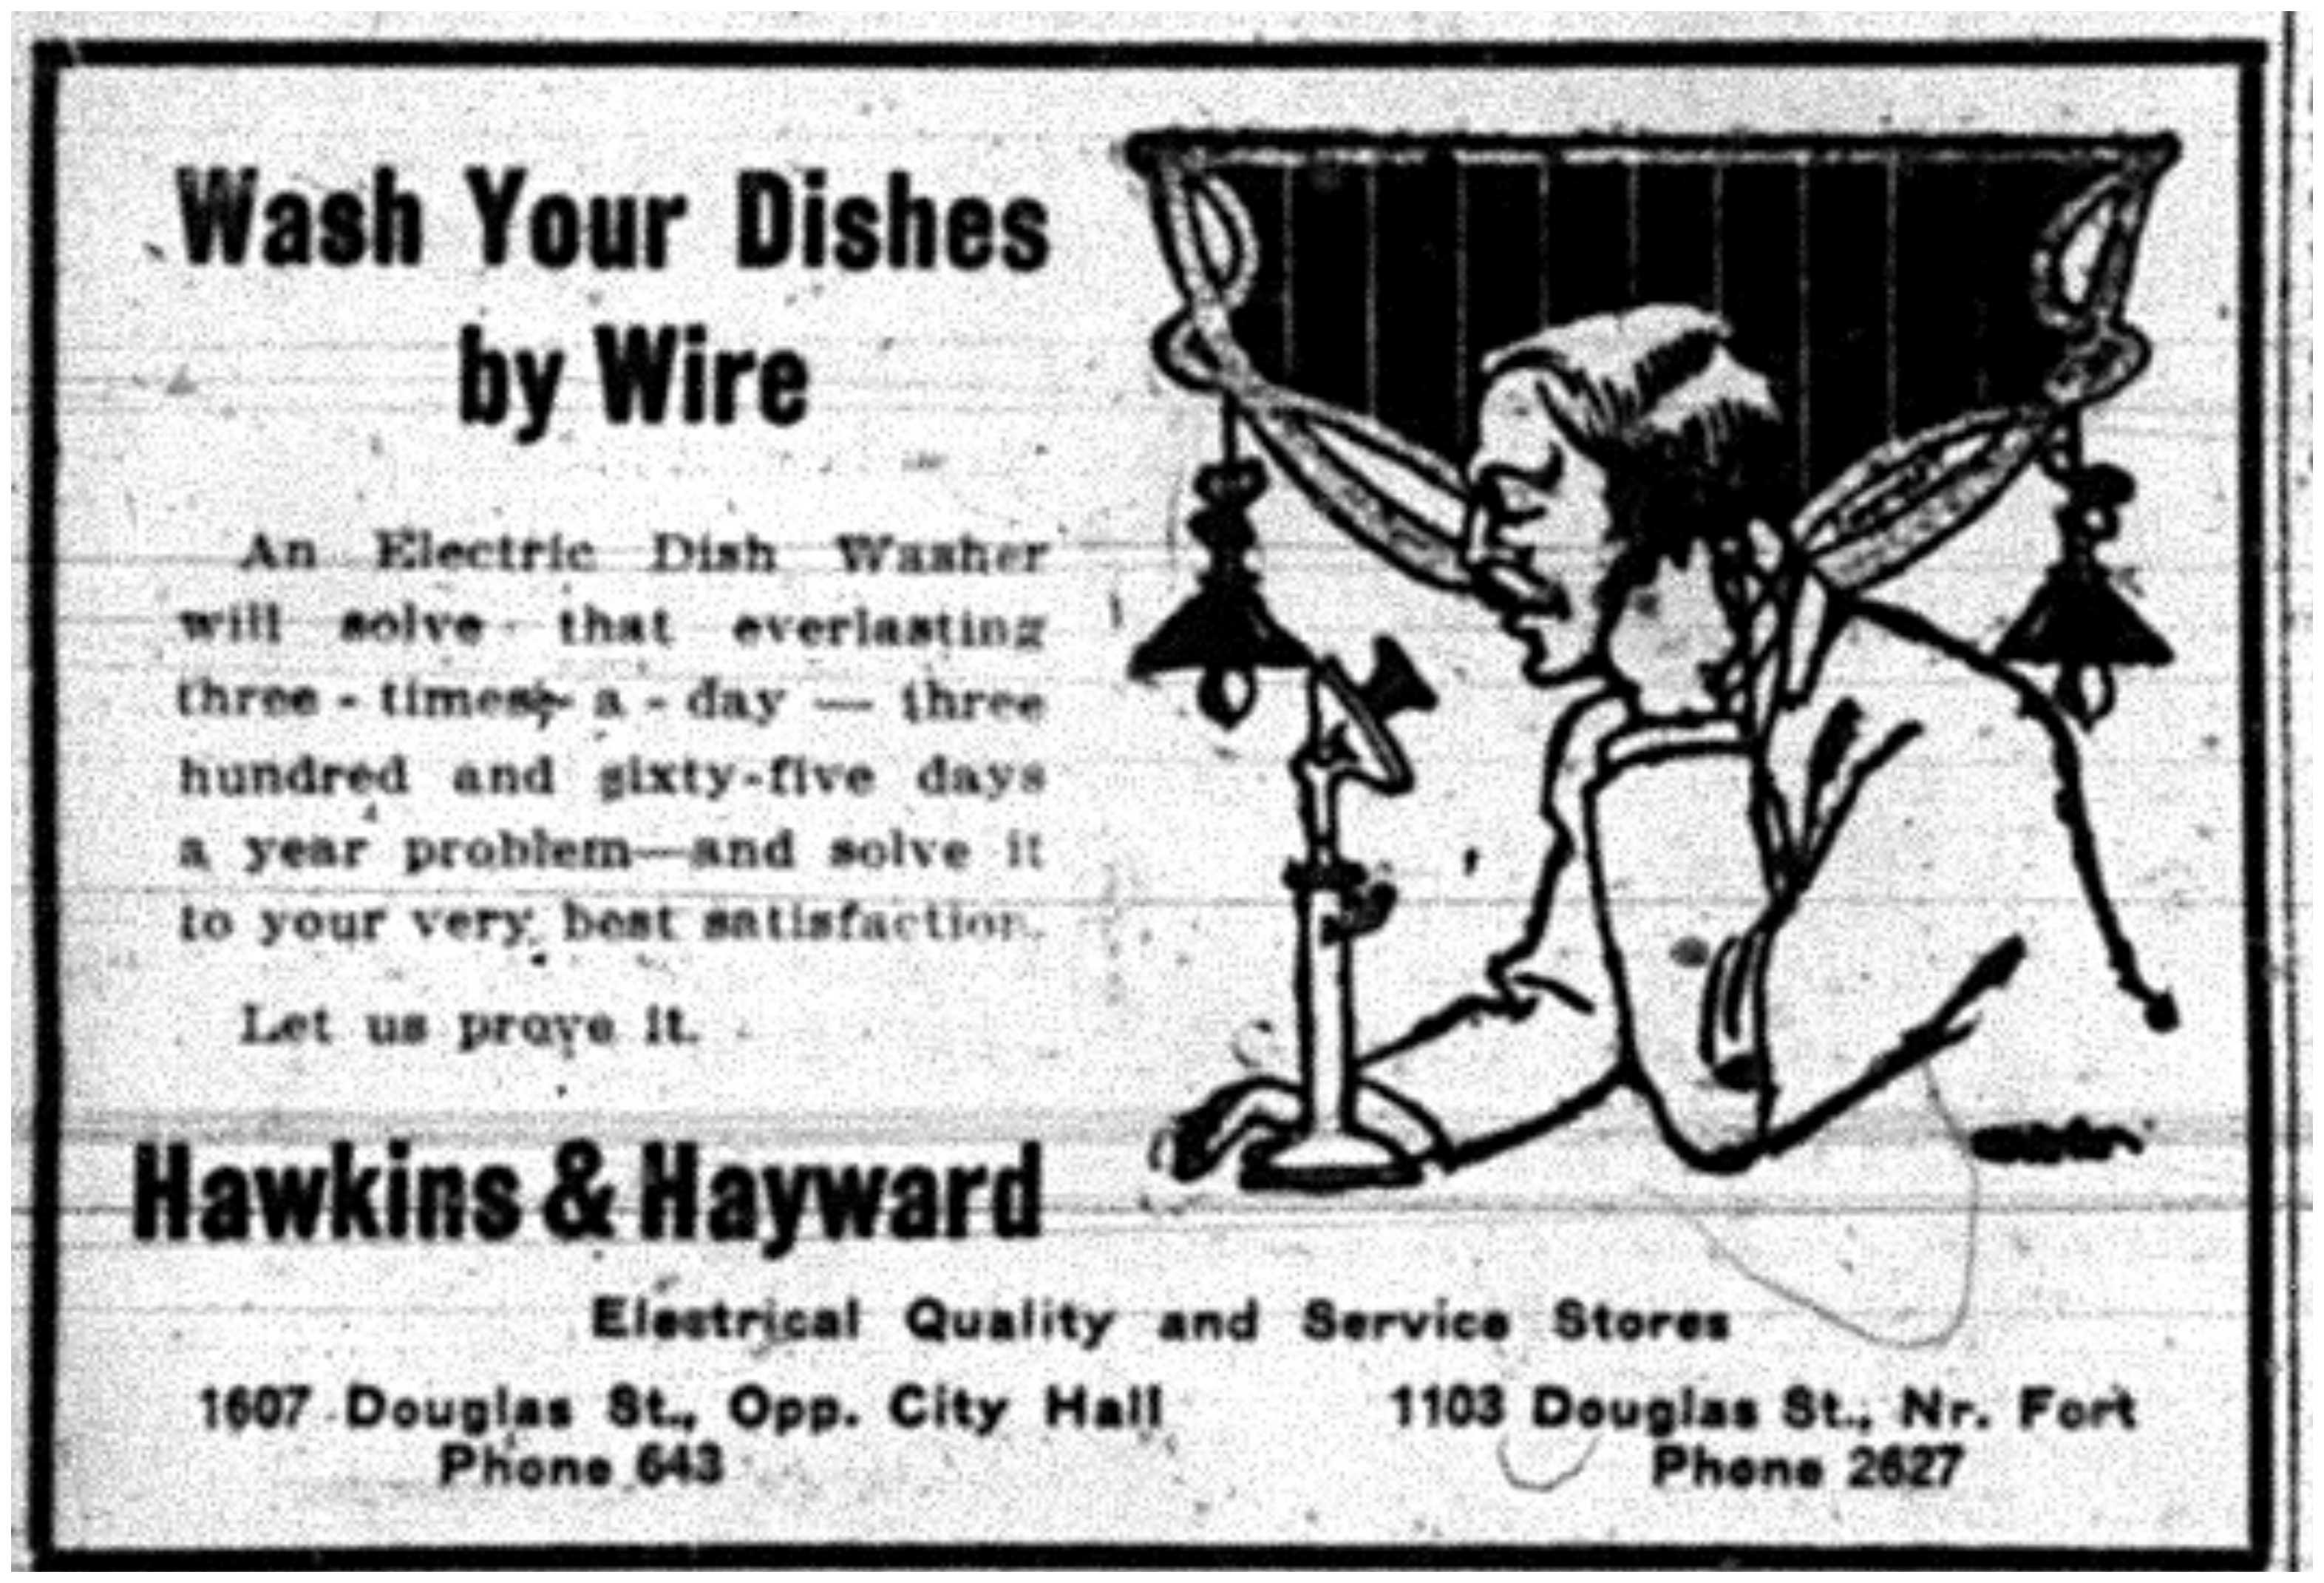 "Wash Your Dishes By Wire"